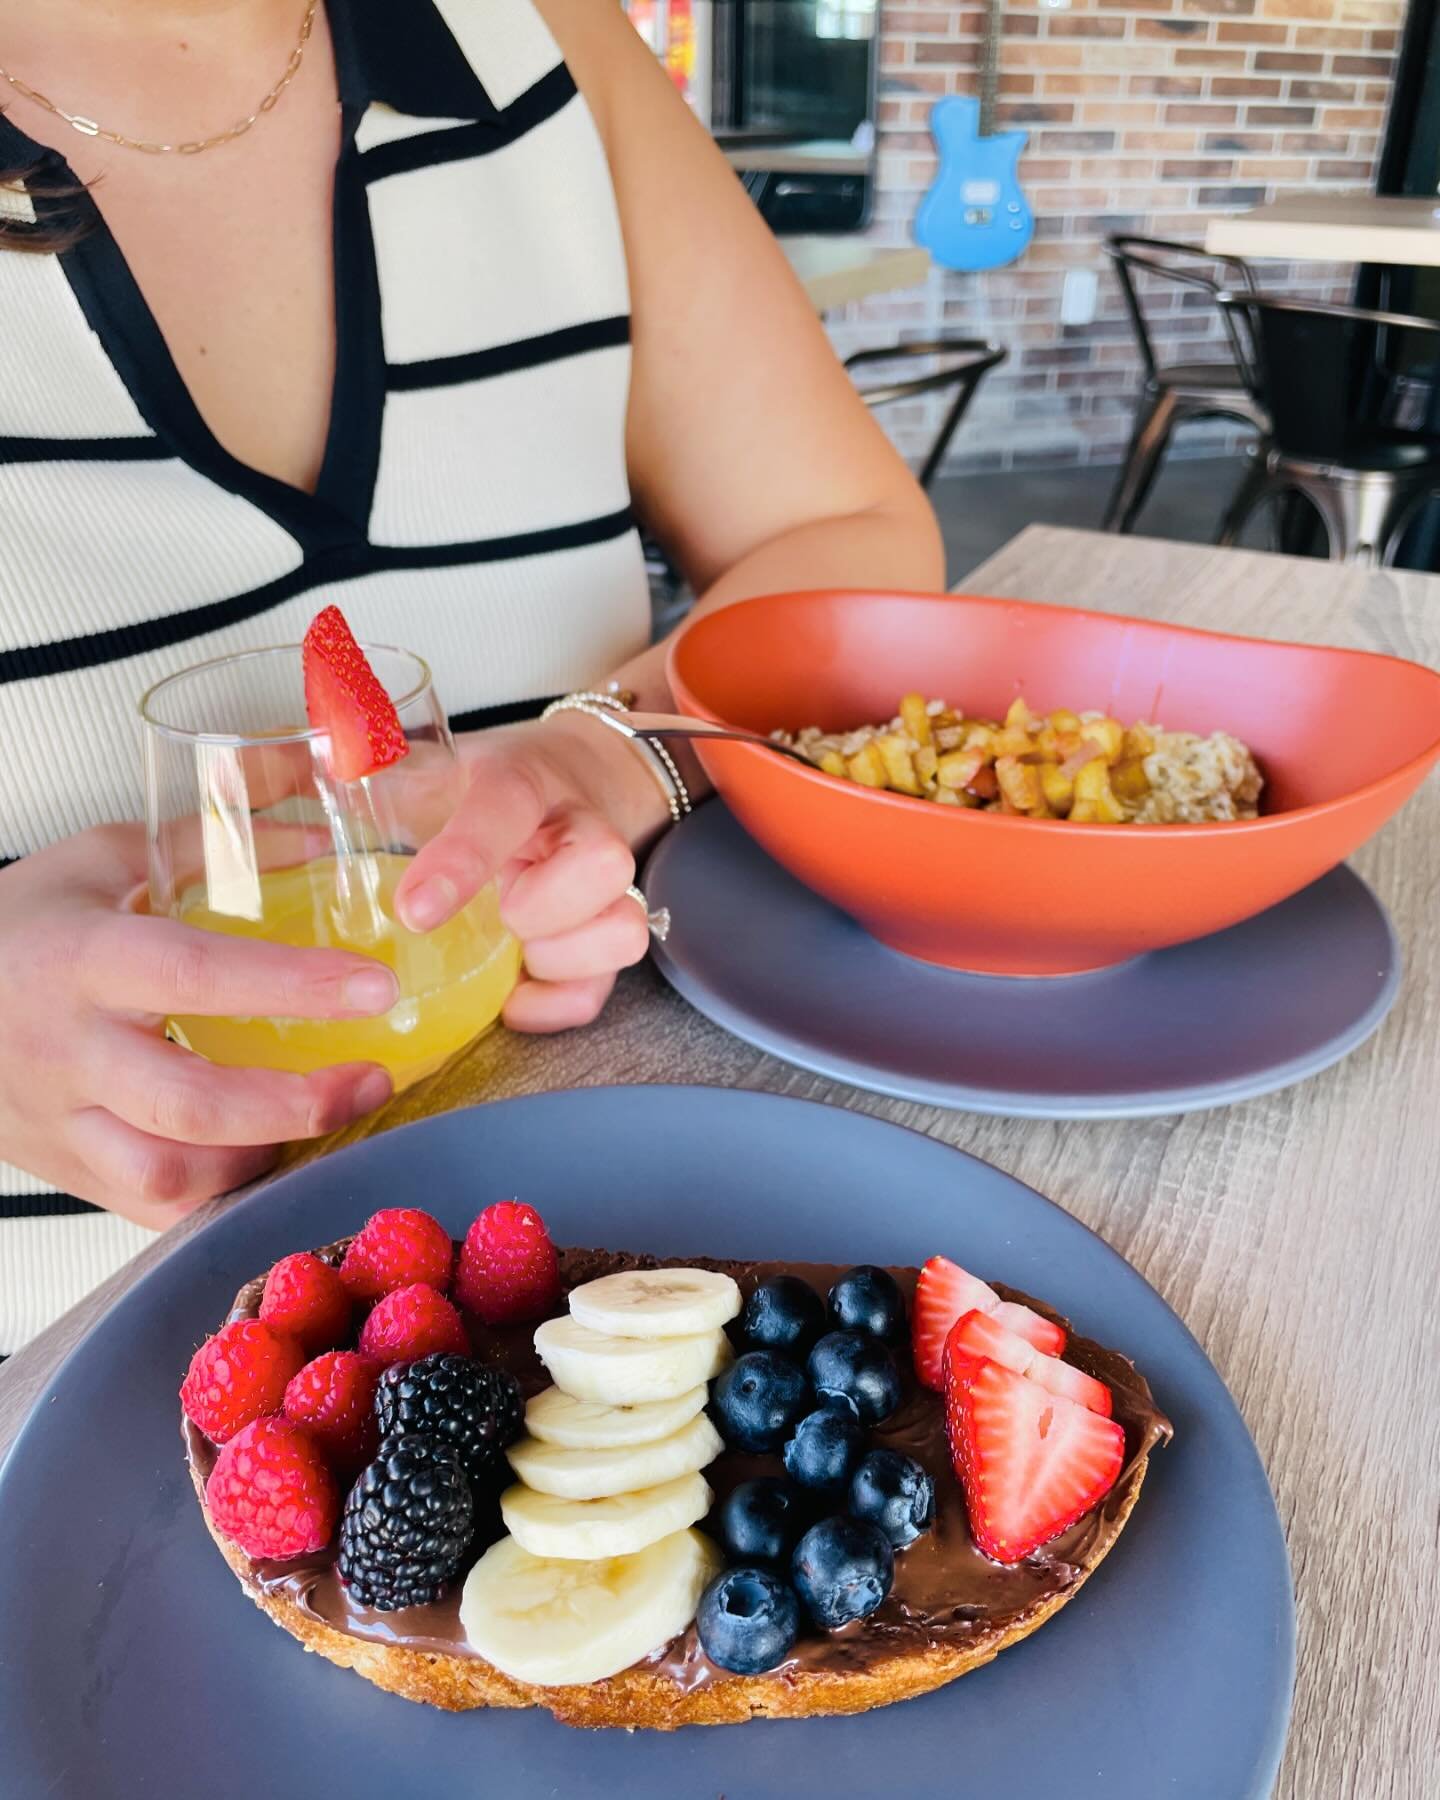 Brunch patio is covered and calling. Get champagne with a side of OJ, indulge a little. Brunch starts today from 10am-2pm. 
.
Pro tip: Get The Fancy Quaker, it comes with buttery sourdough toast that makes the most perfect foundation for Nutella and 